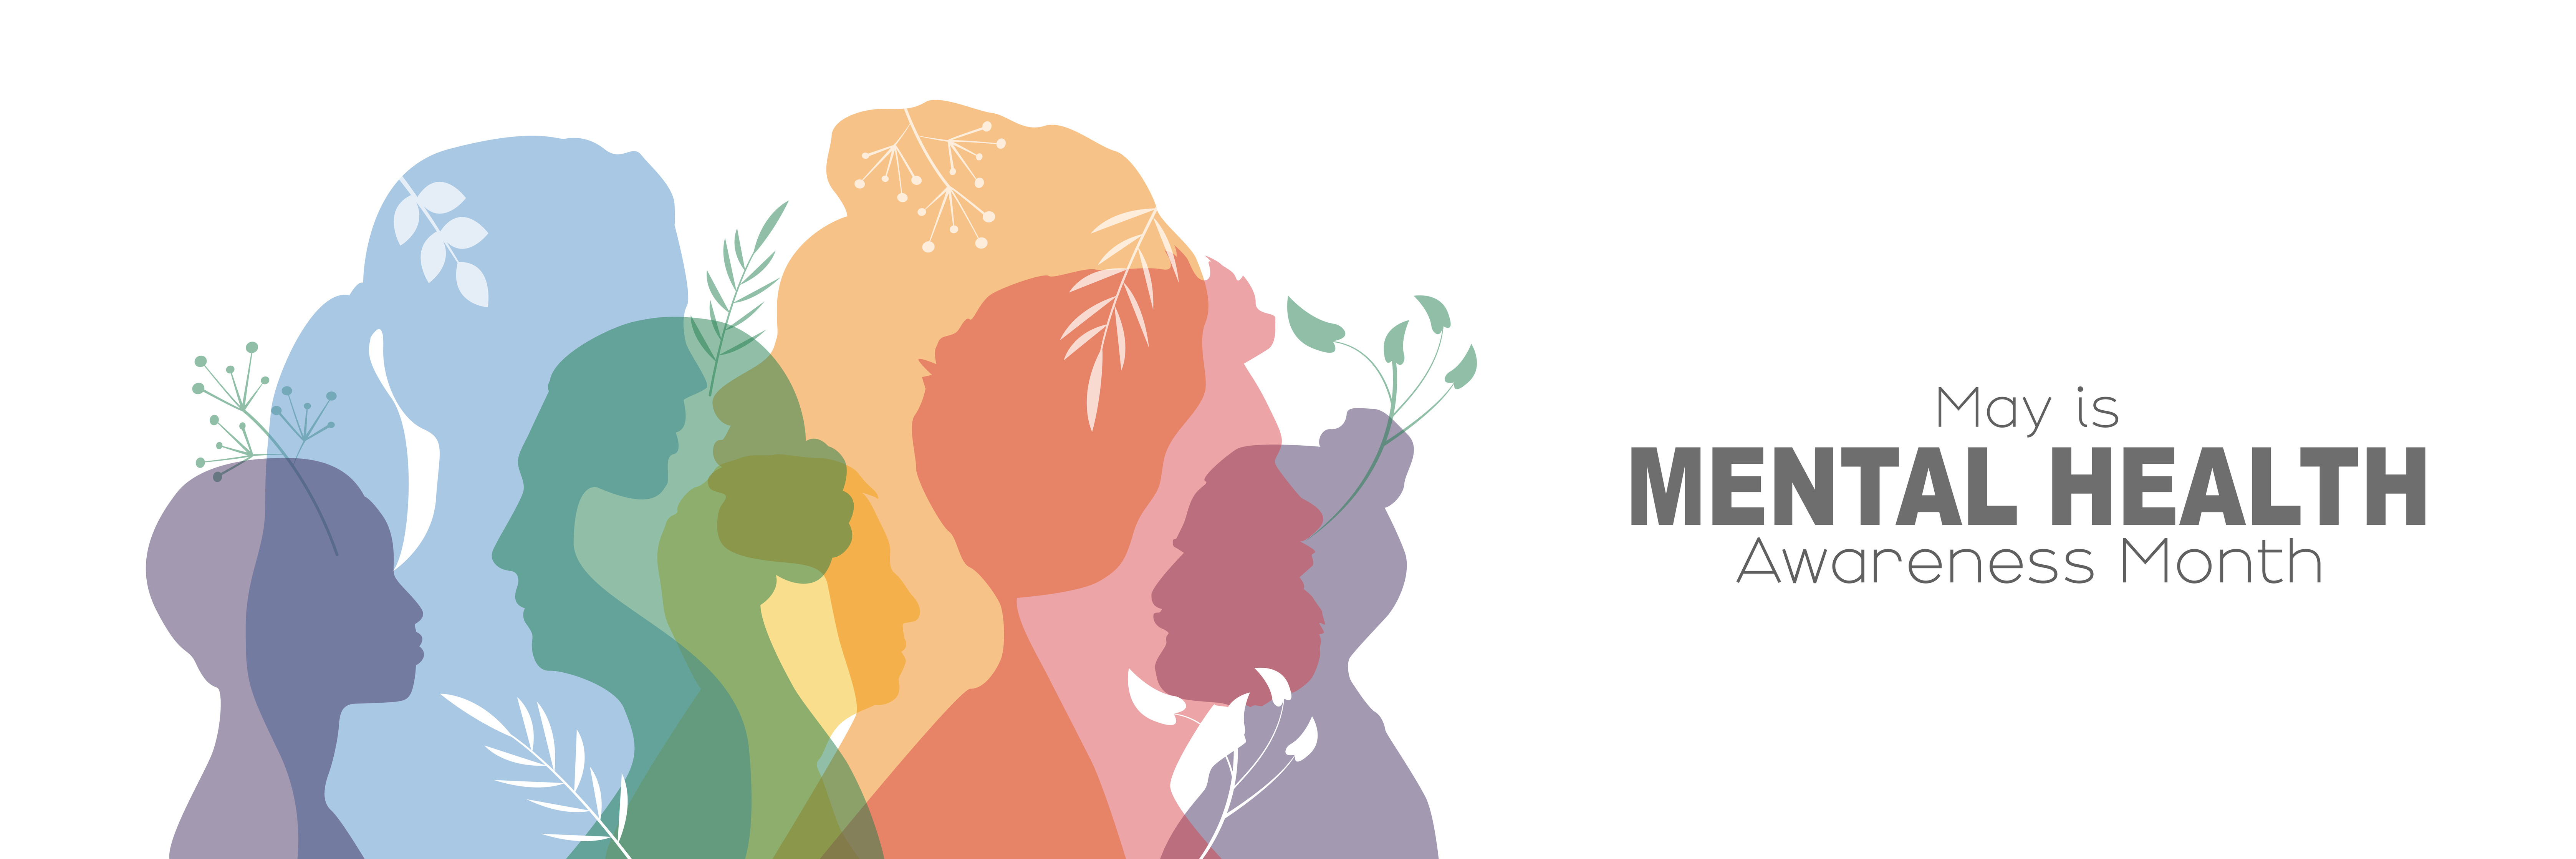 Graphic showing the silhouettes people in various colors, overlapping, with images of leafy plants. Text reads “May is Mental Health Awareness Month“.